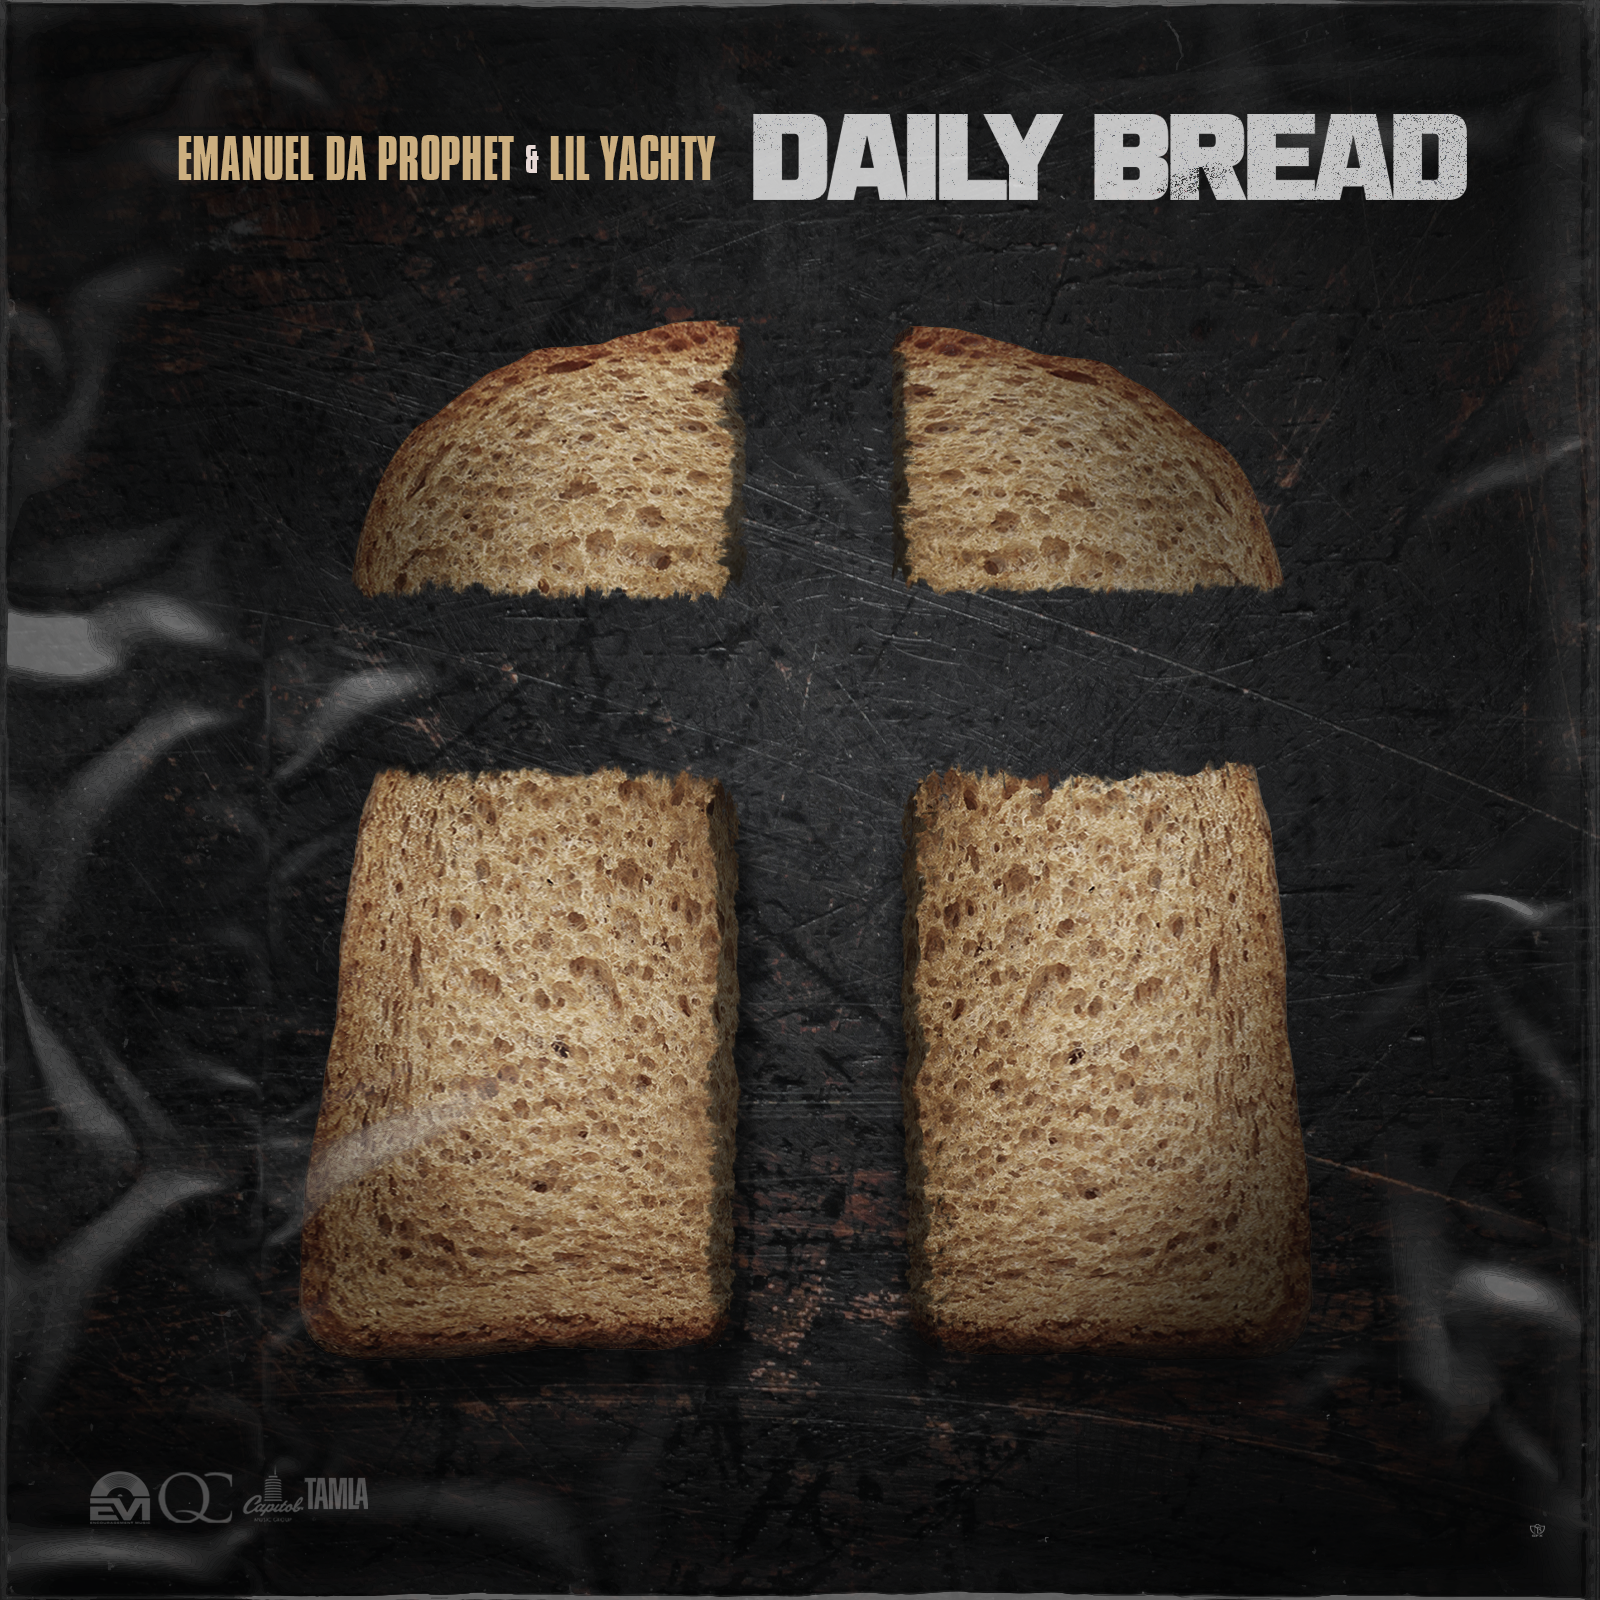 EmanuelDaProphet Links Up with Lil Yachty on 'Daily Bread' miixtapechiick